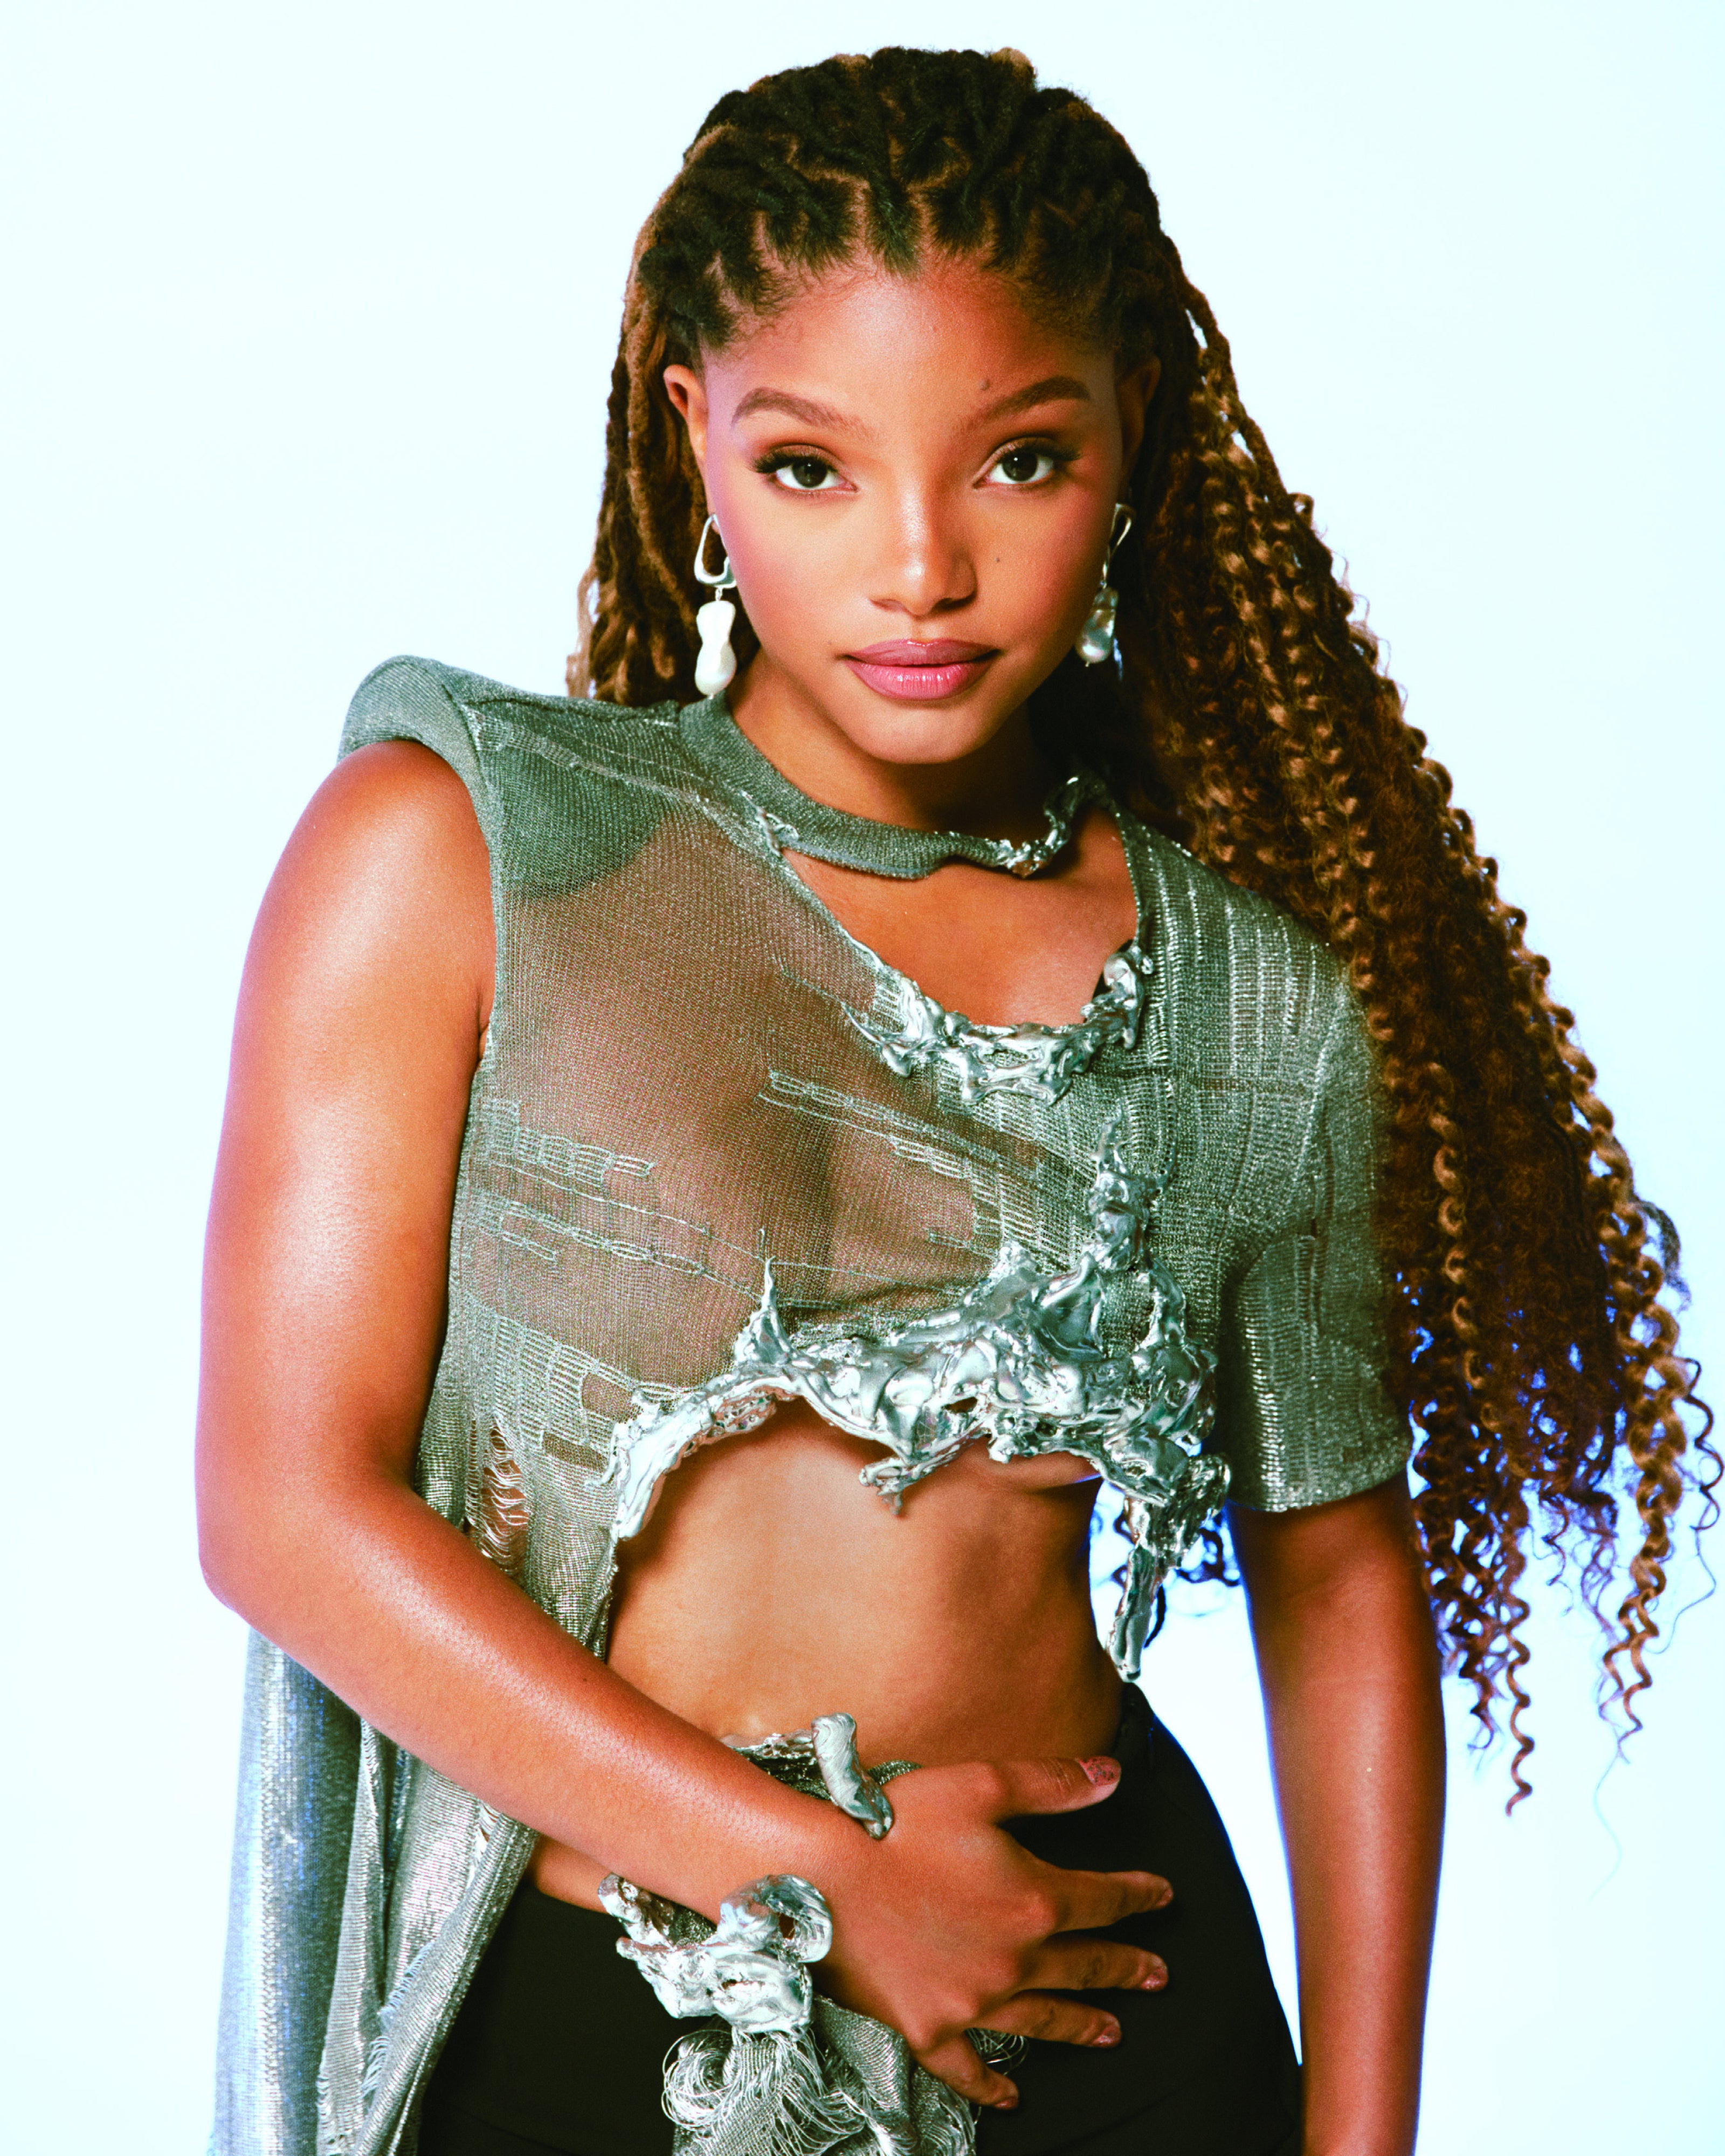 Image of halle bailey for Variety wearing Weiraen